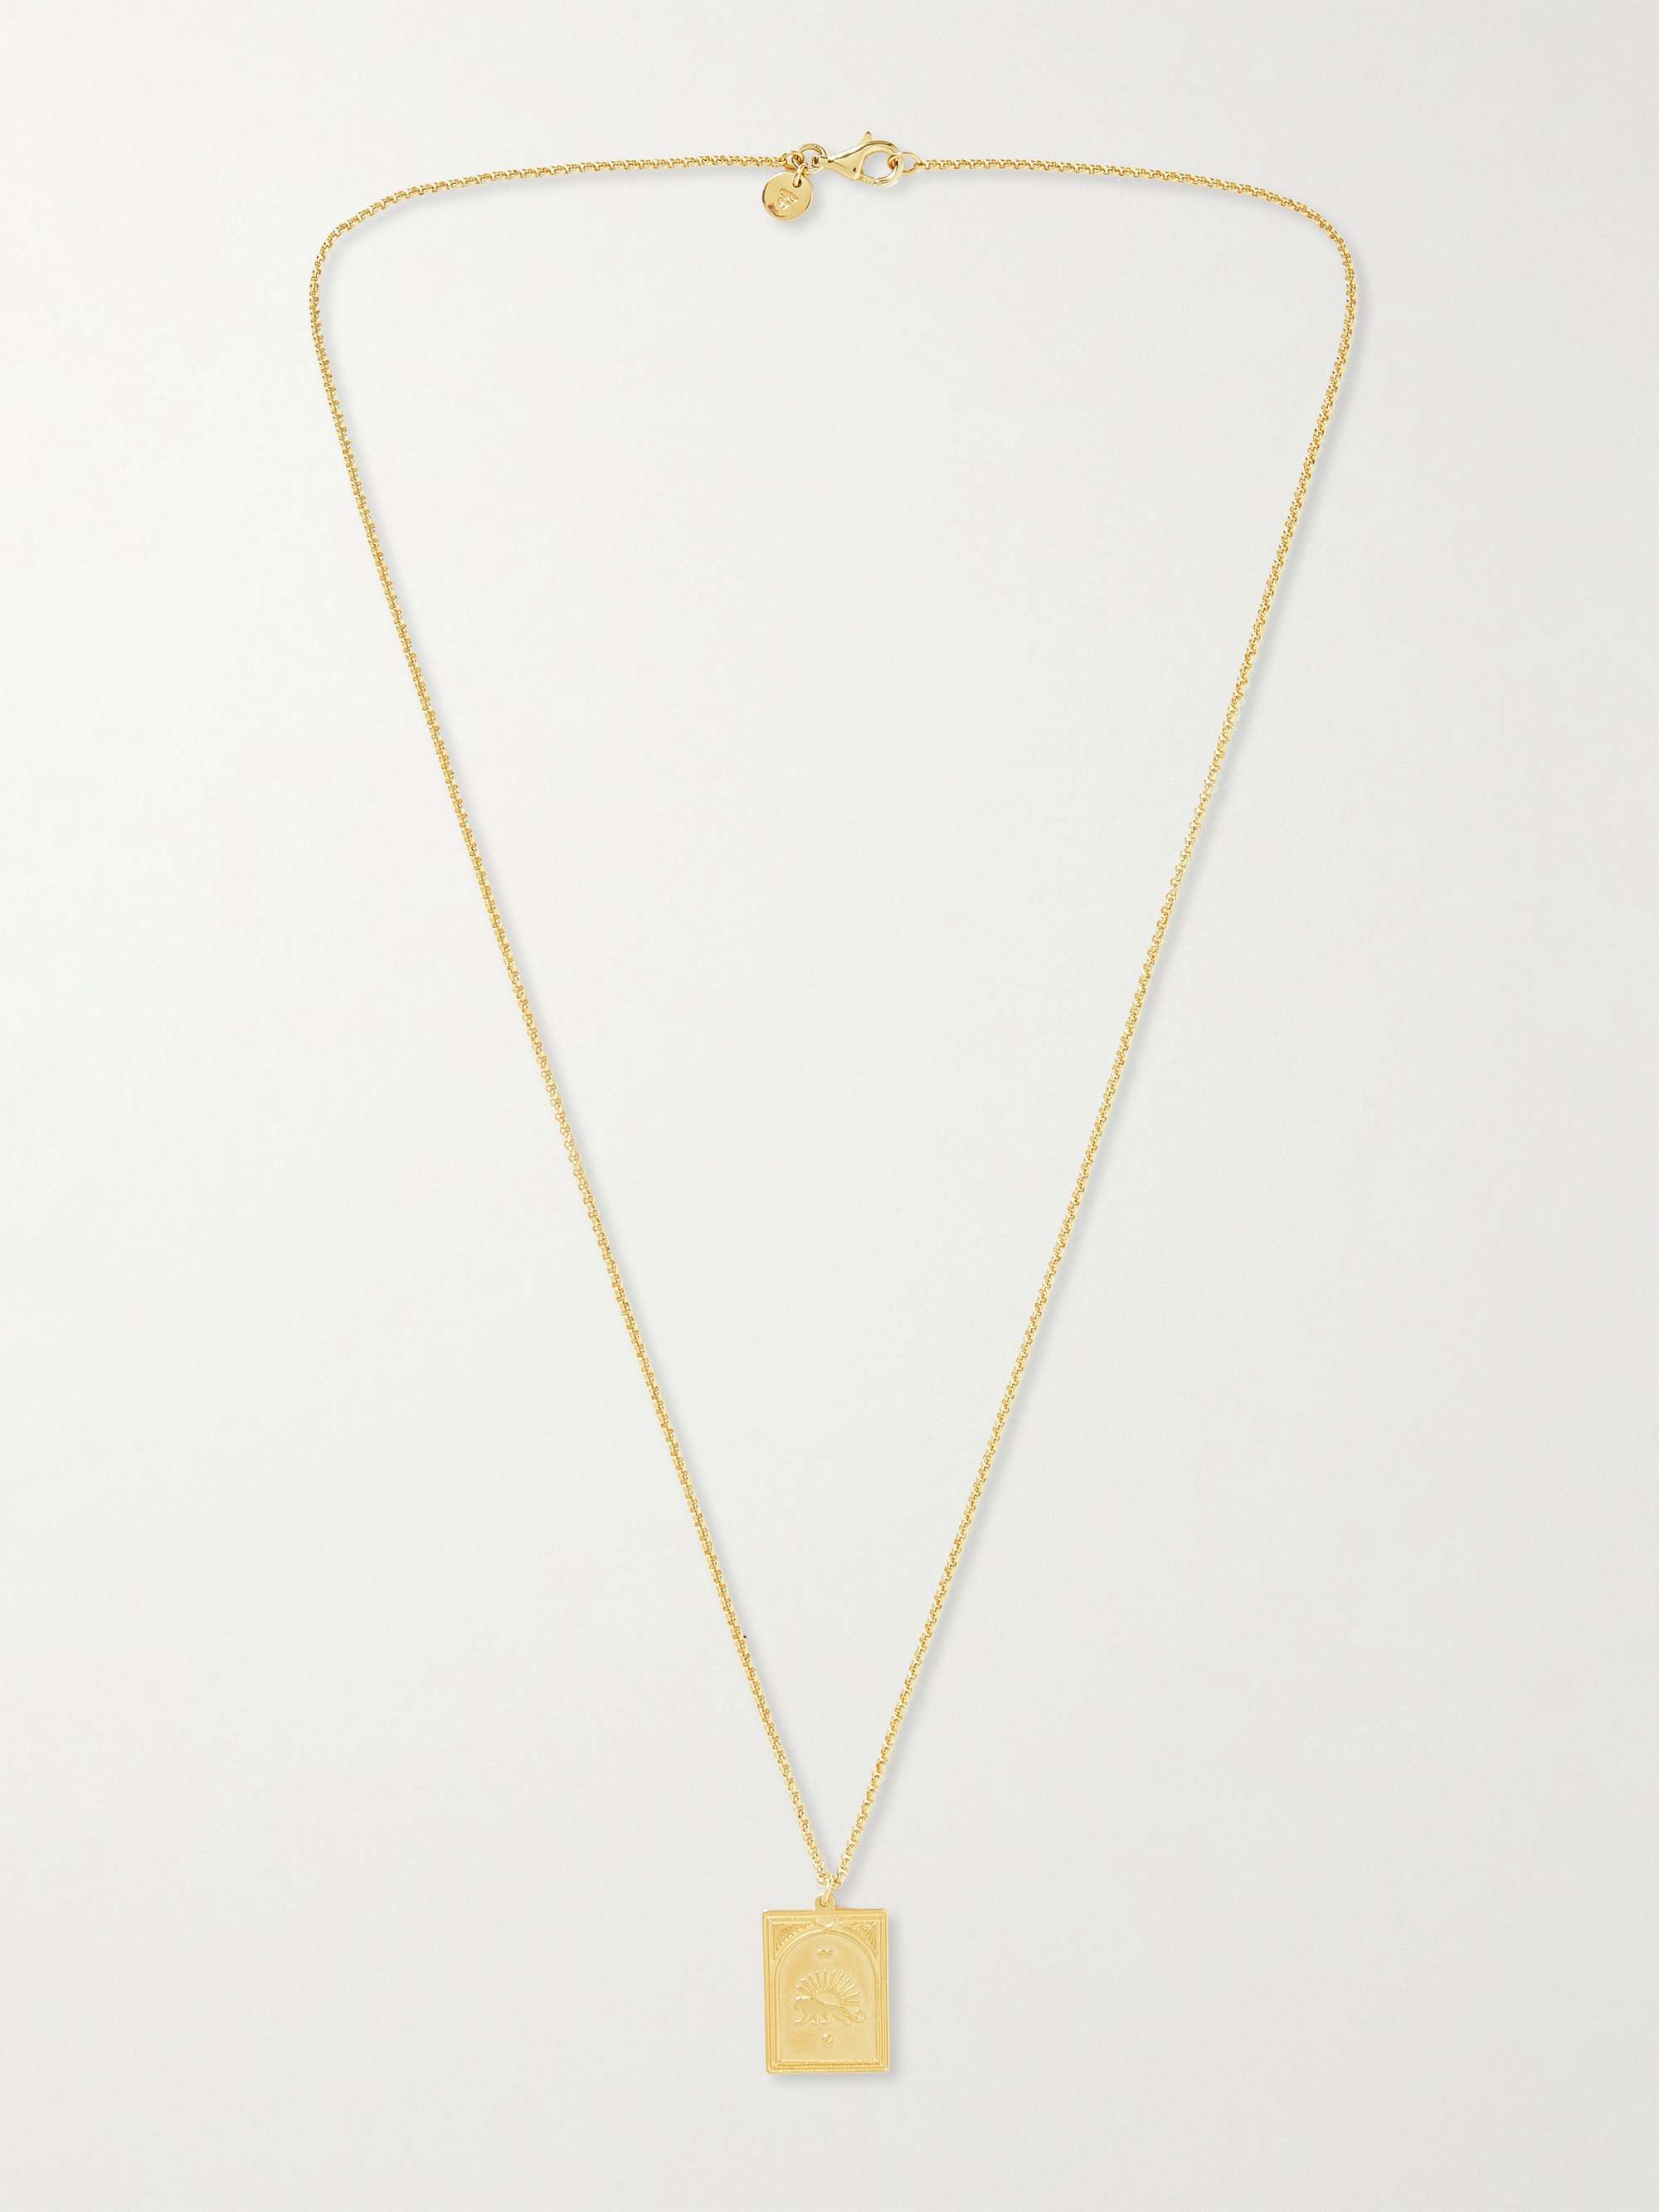 TOM WOOD Tarot Strength Gold-Plated Necklace